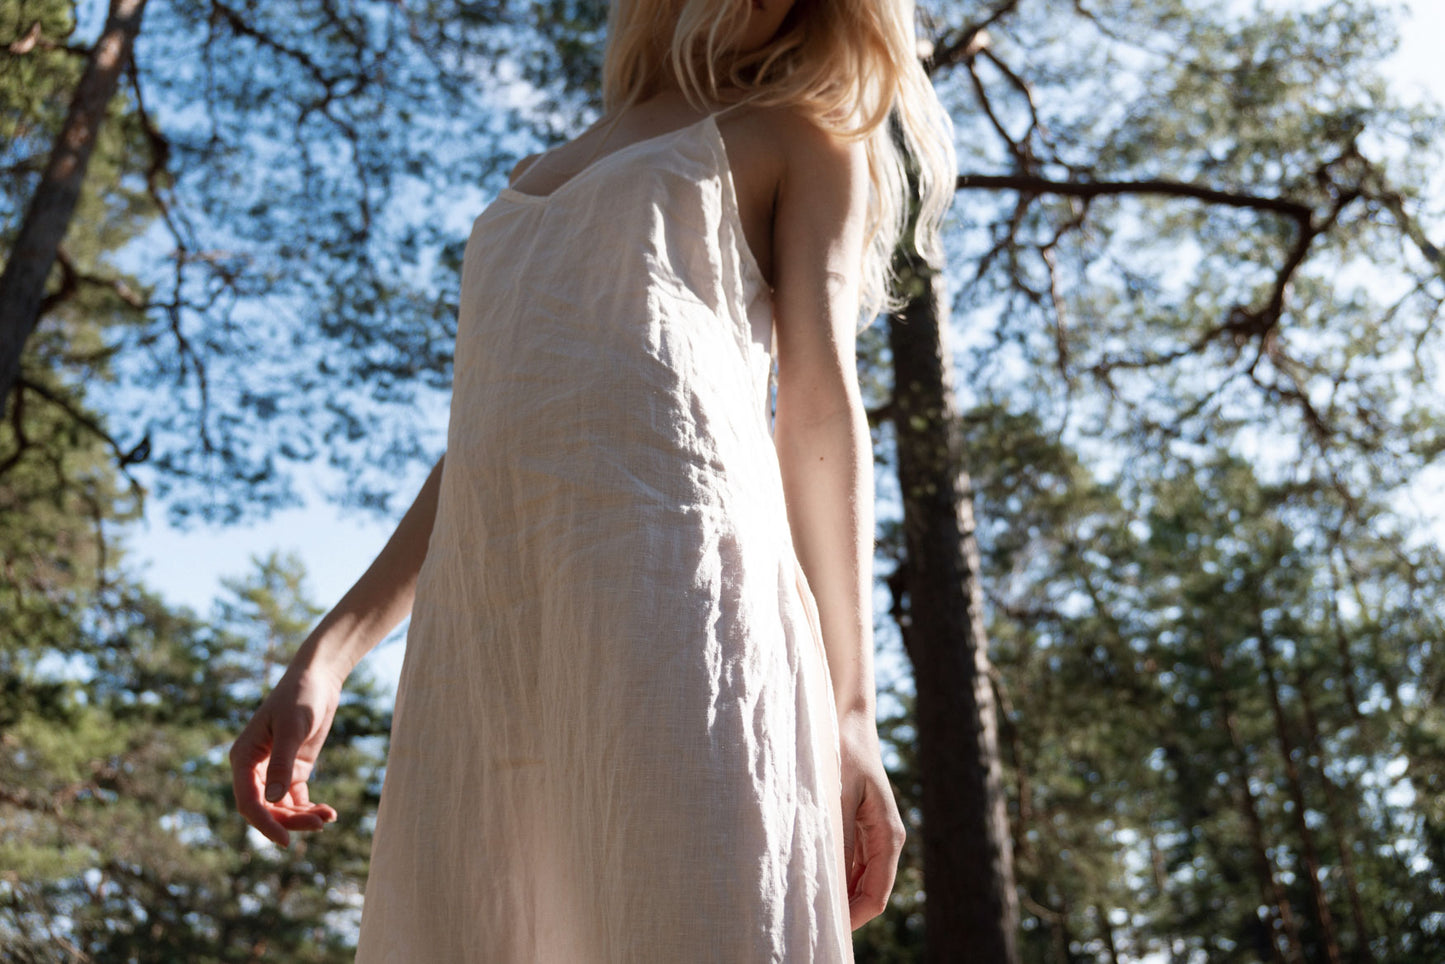 Organic, sustainable, sexy, long white linen nightwear slip dress with spaghetti straps and splits. This linen lingerie nightdress is natural, comfortable, soft and pure. This sleepwear nightgown is a conscious and healthy choice for your body and environment.